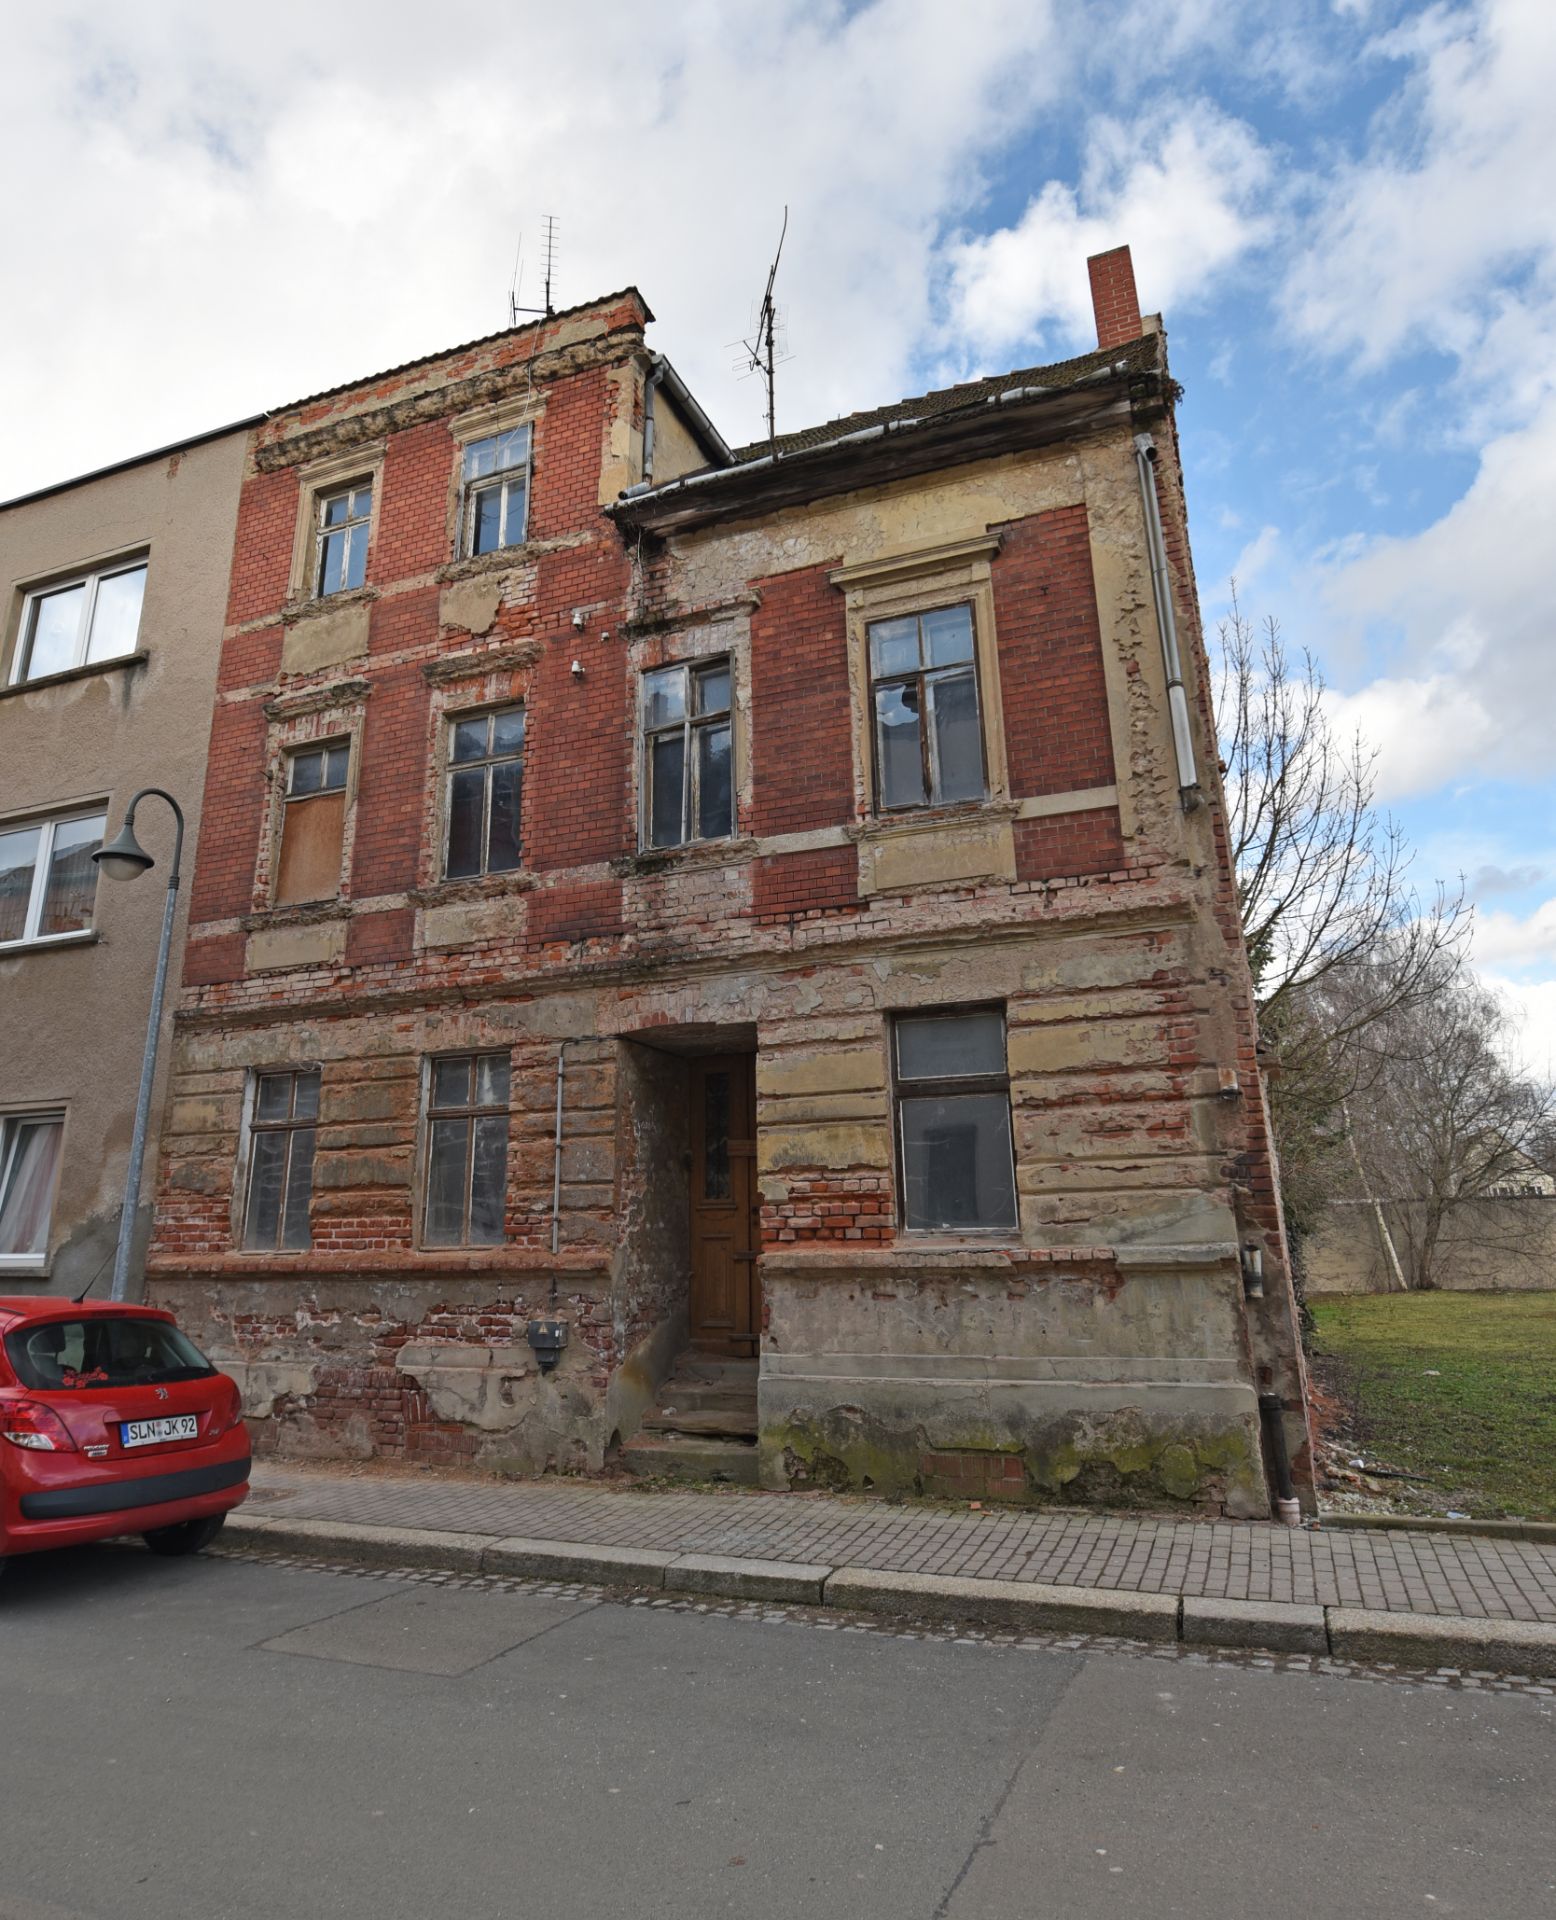 LARGE HOUSE IN SCHMÖLLN, GERMANY - Image 7 of 15